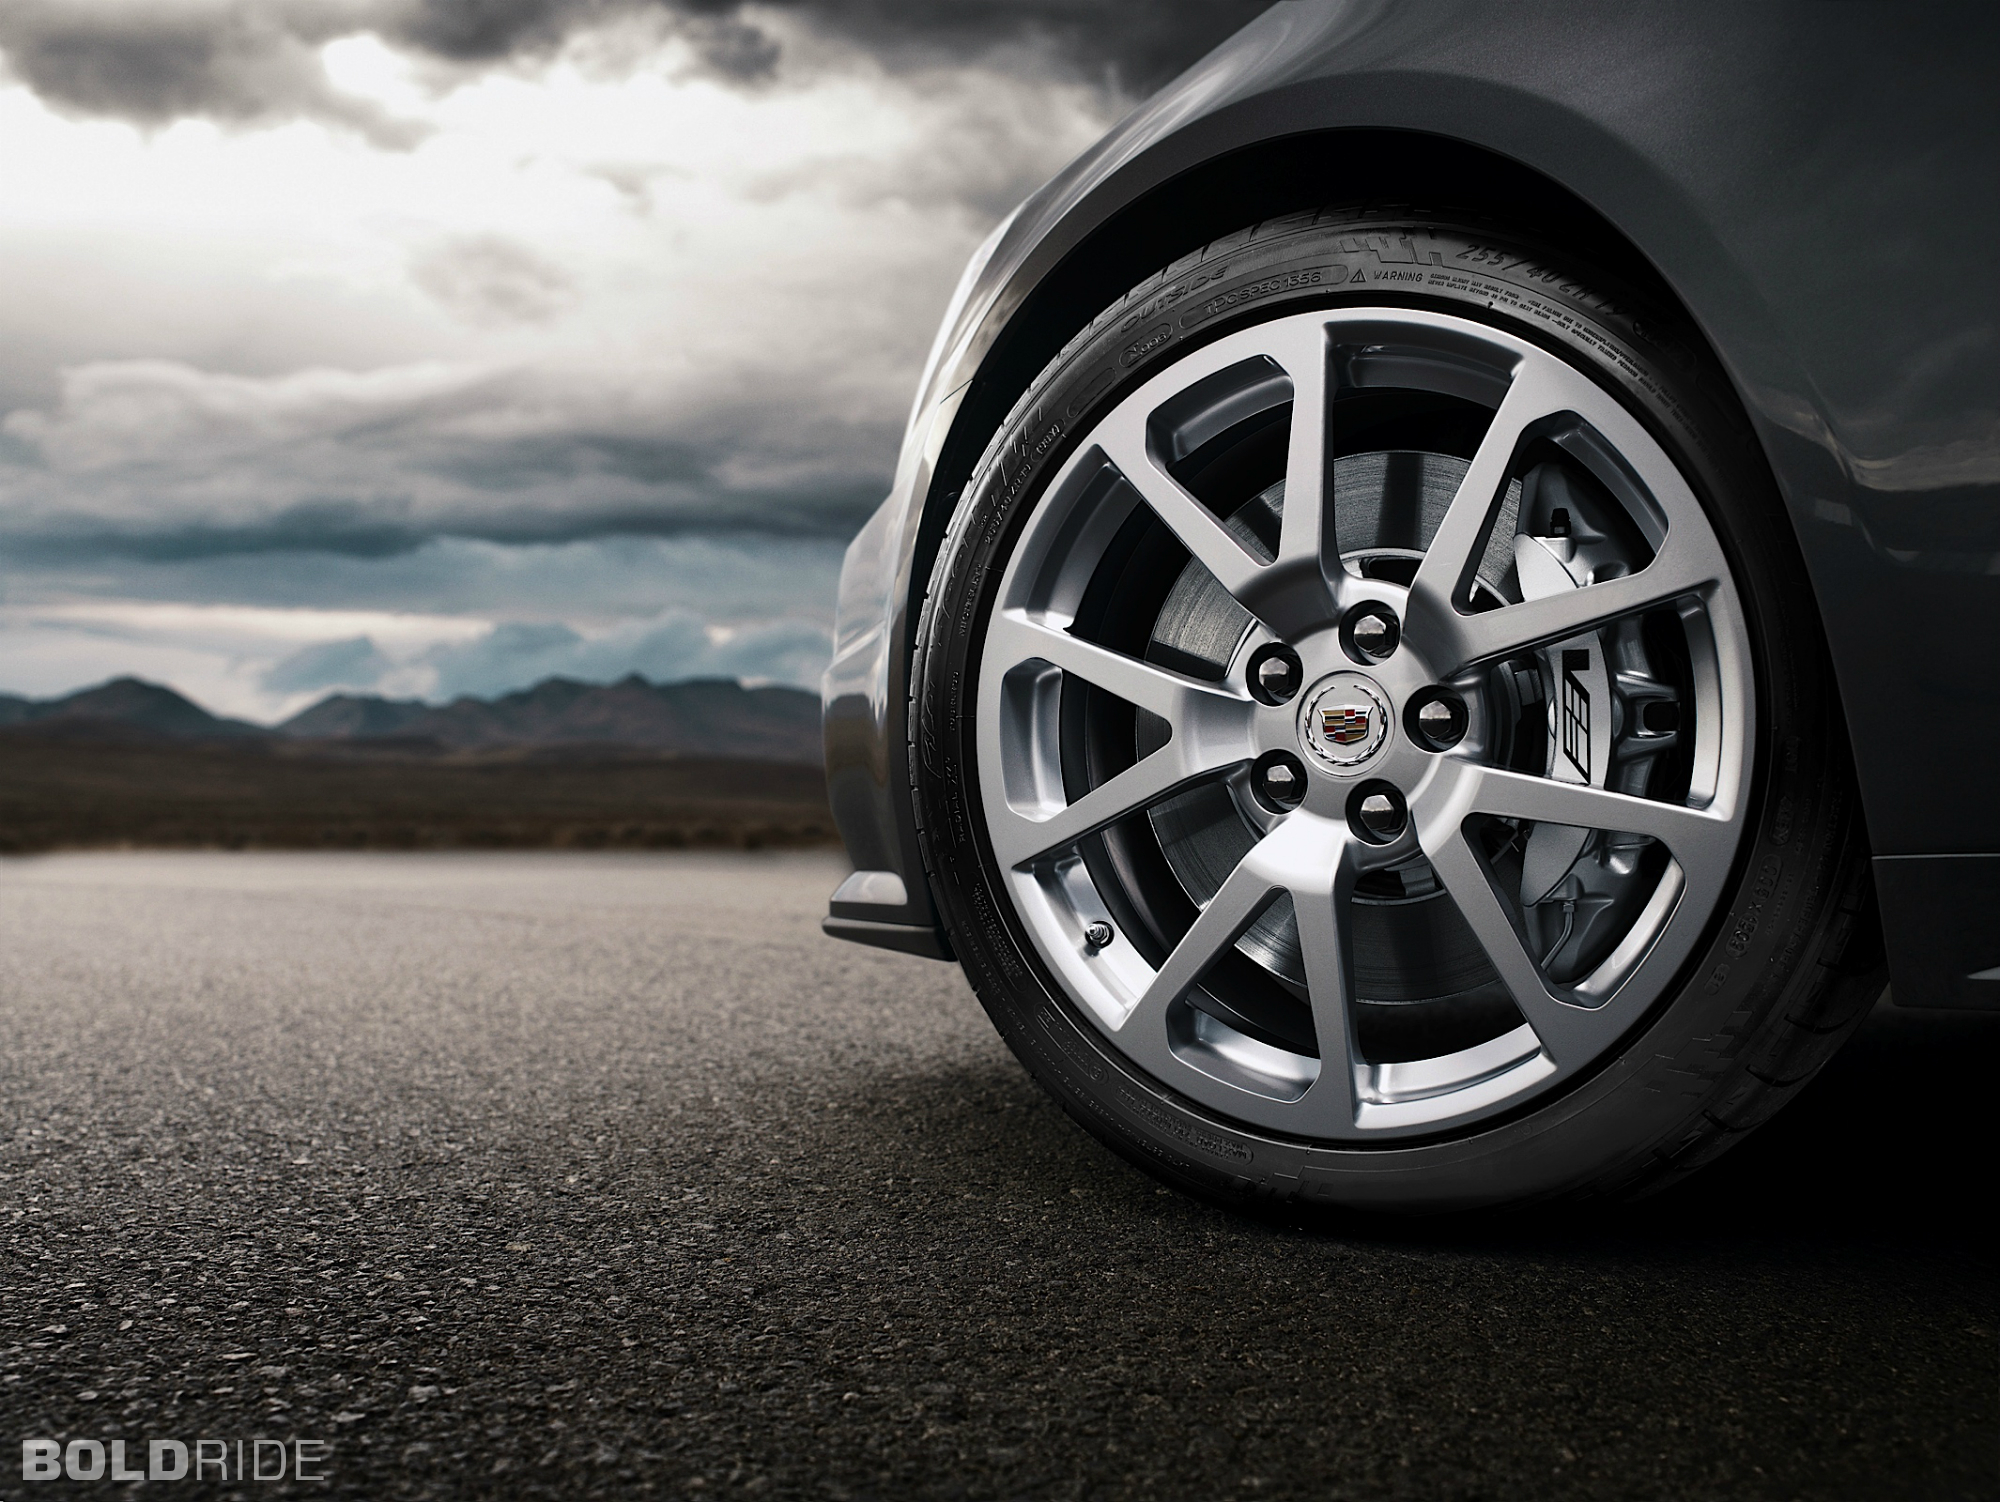 2014, Cadillac, Cts v, Coupe, Muscle, Sportcar, Wheel, Wheels Wallpaper